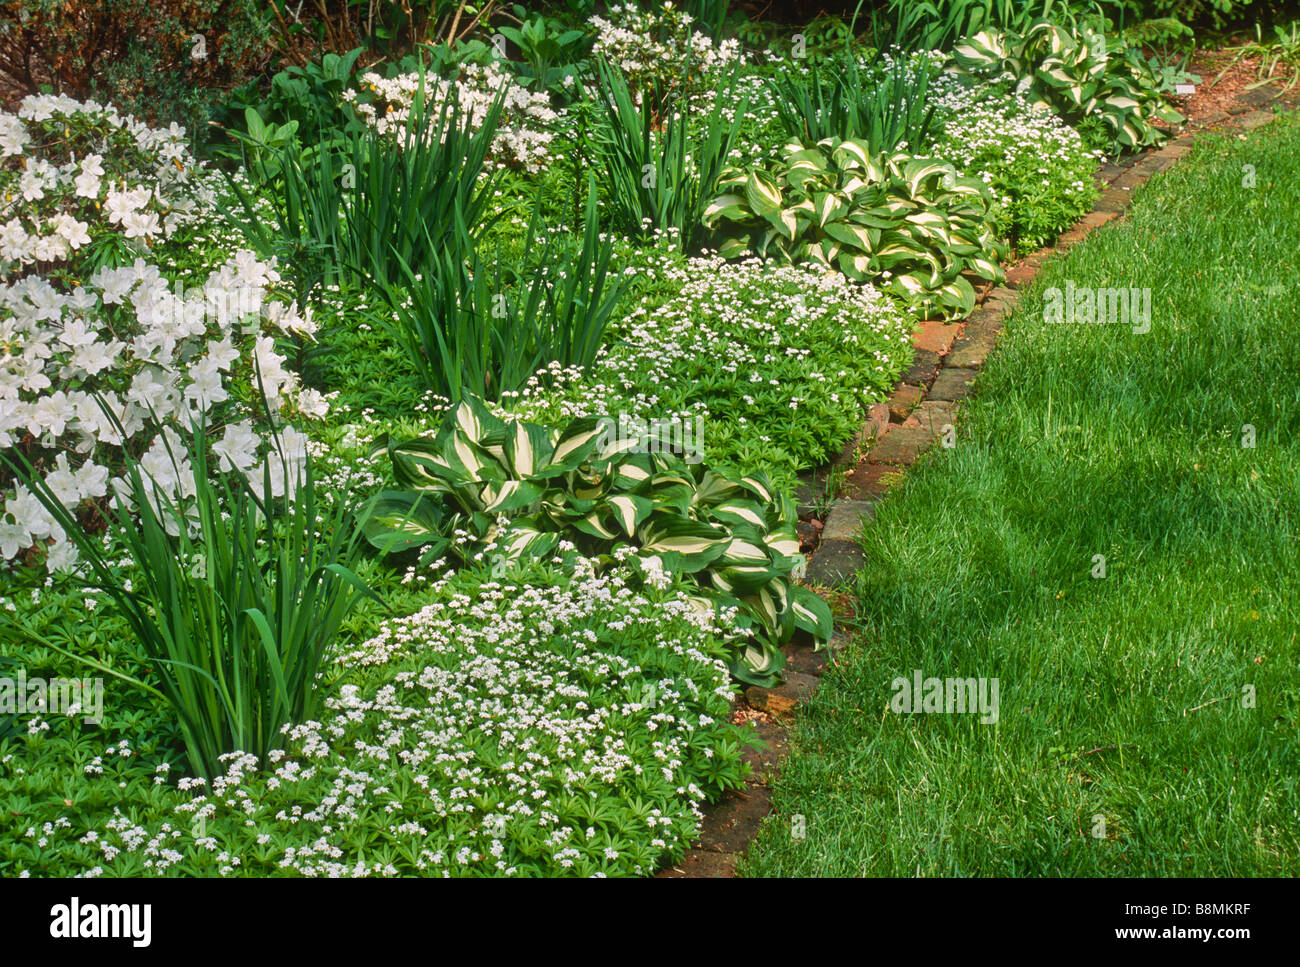 A spring garden with a white color scheme and a brick mowing strip. Stock Photo